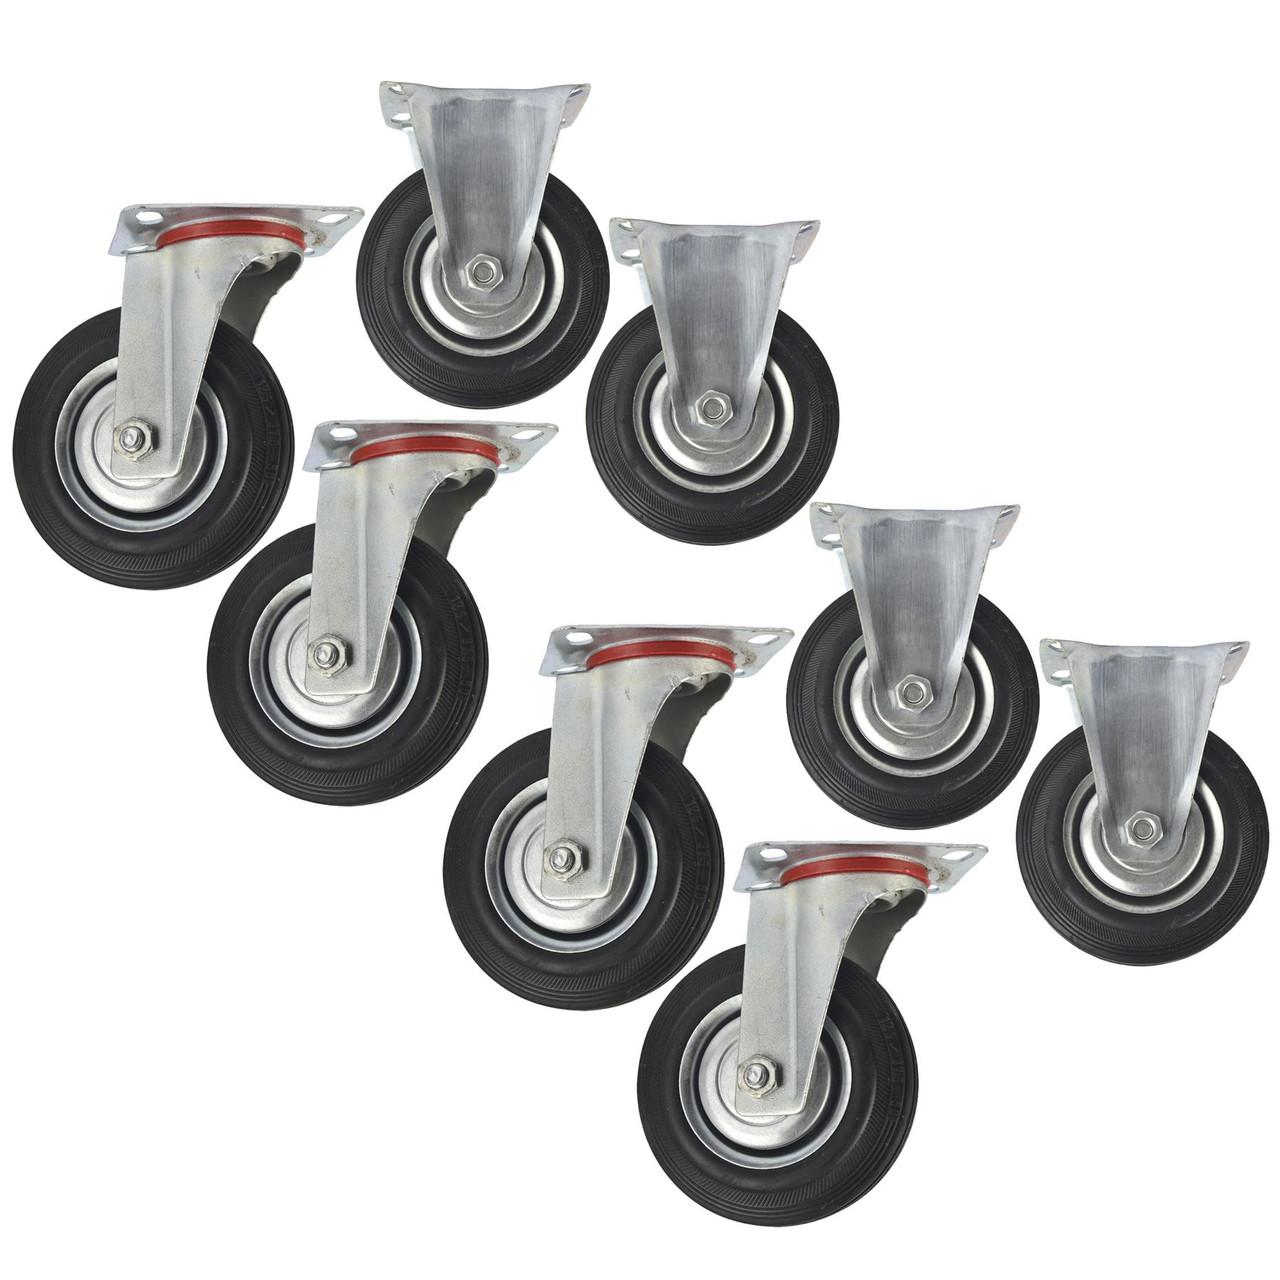 CST06_08 Rubber Fixed and Swivel With Brake Castor Wheels 5" 125mm 4 Pack 